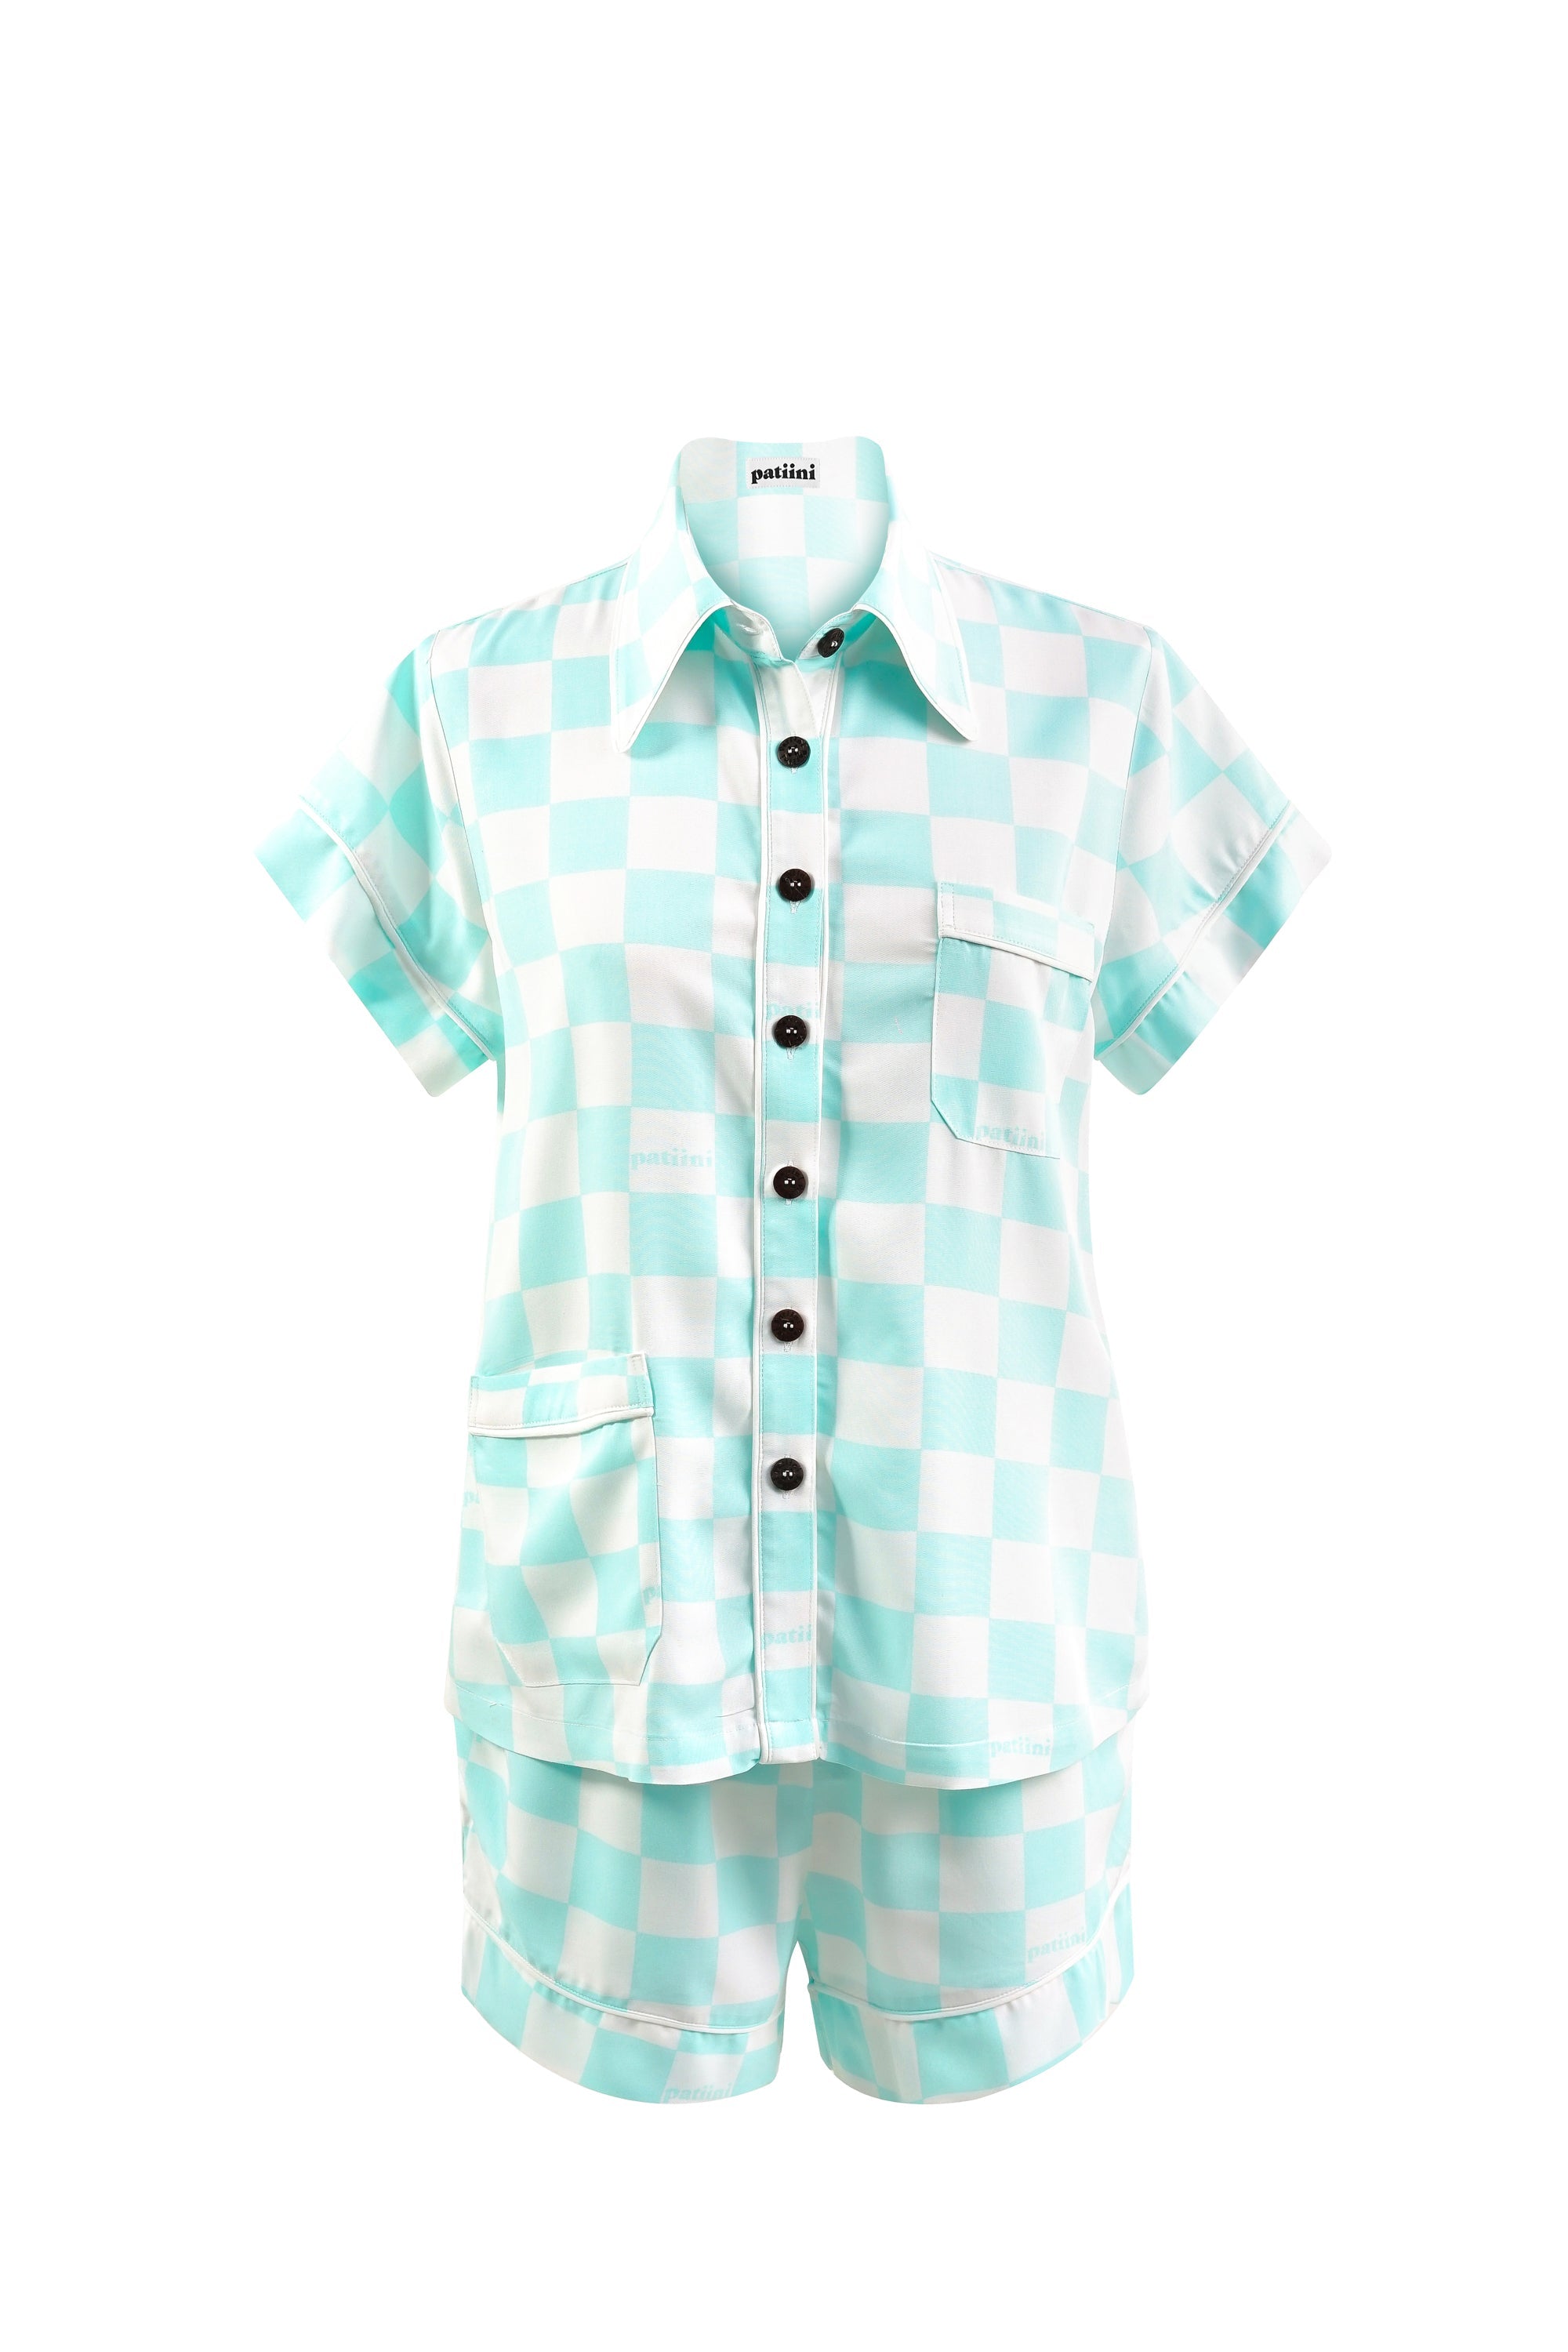 White and teal checkered short-sleeve pajama set with white piping.